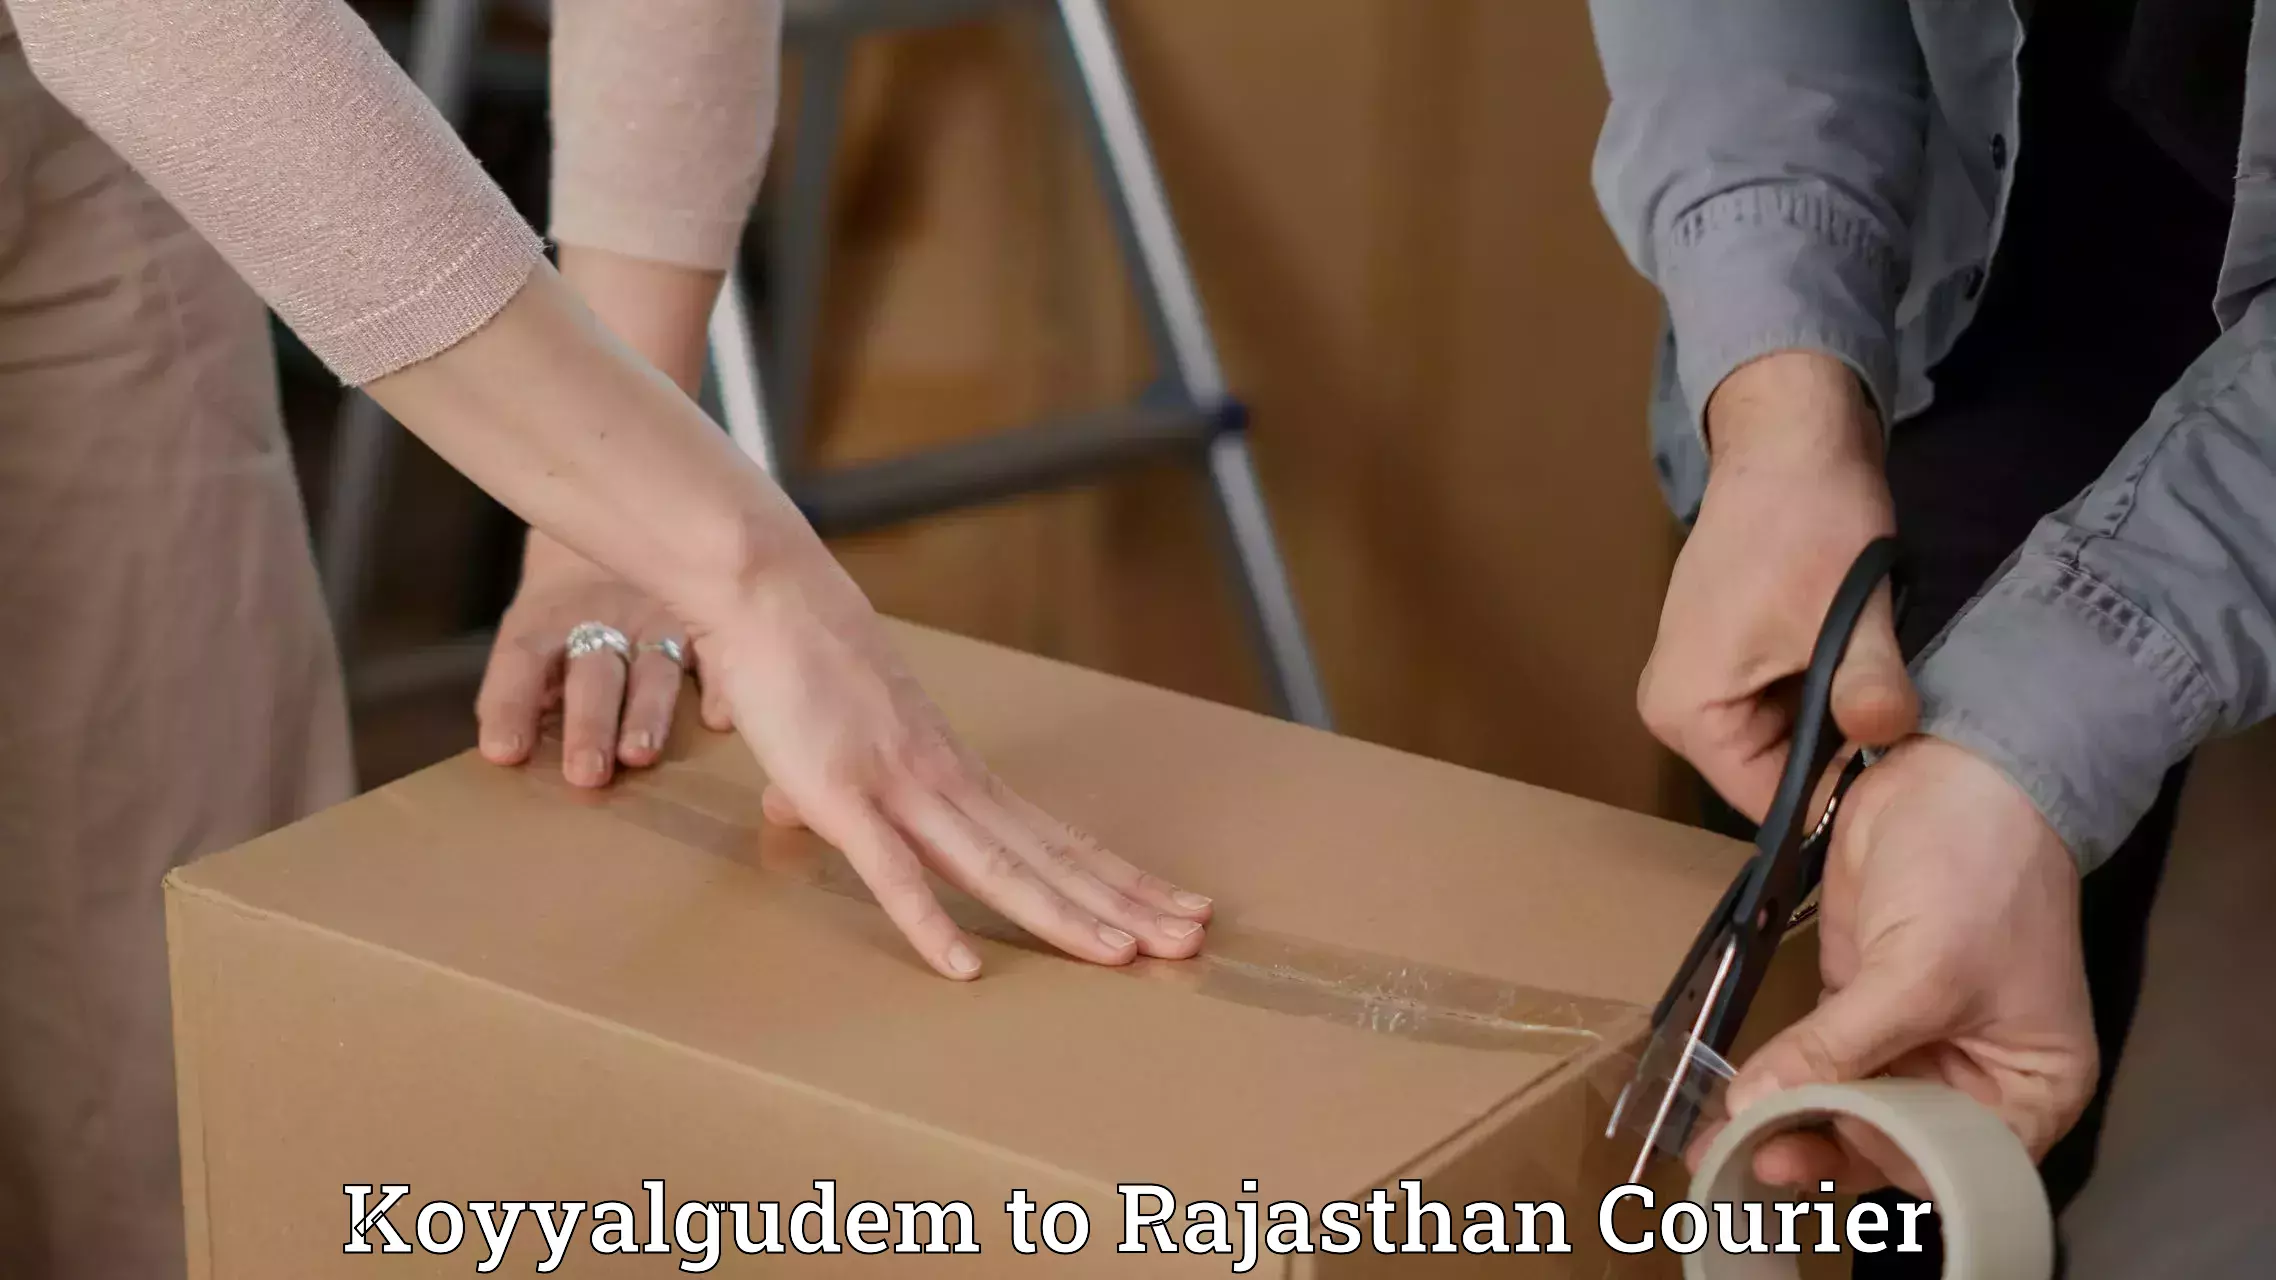 On-call courier service Koyyalgudem to Rajasthan